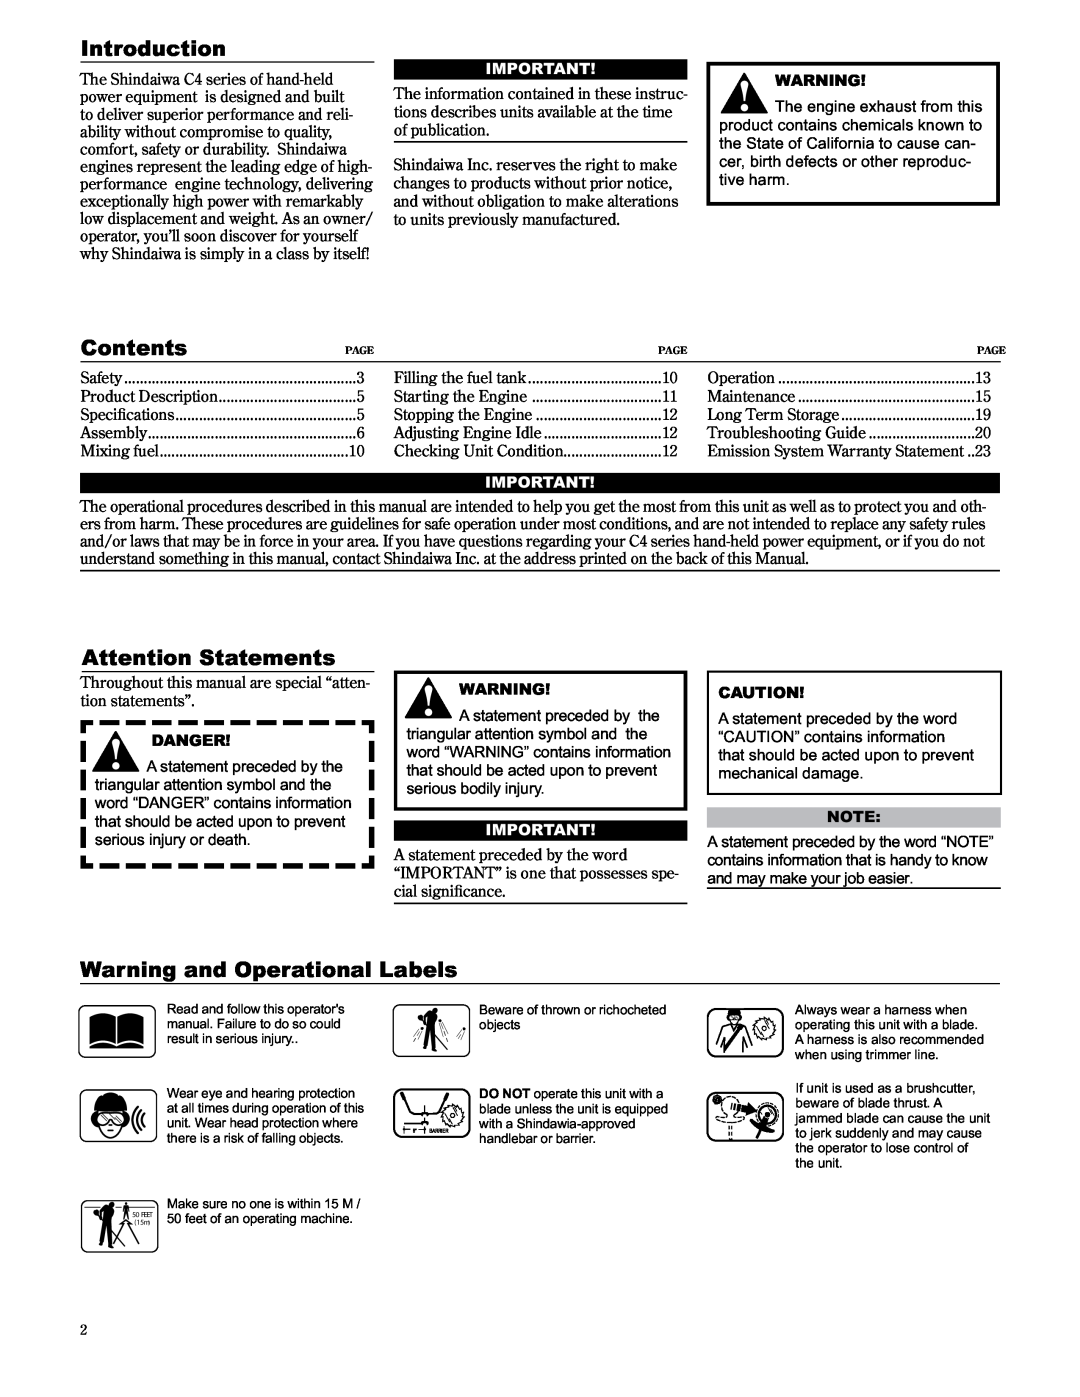 Shindaiwa 89304, C3410/EVC manual Introduction, Contents, Attention Statements, Warning and Operational Labels, Danger 